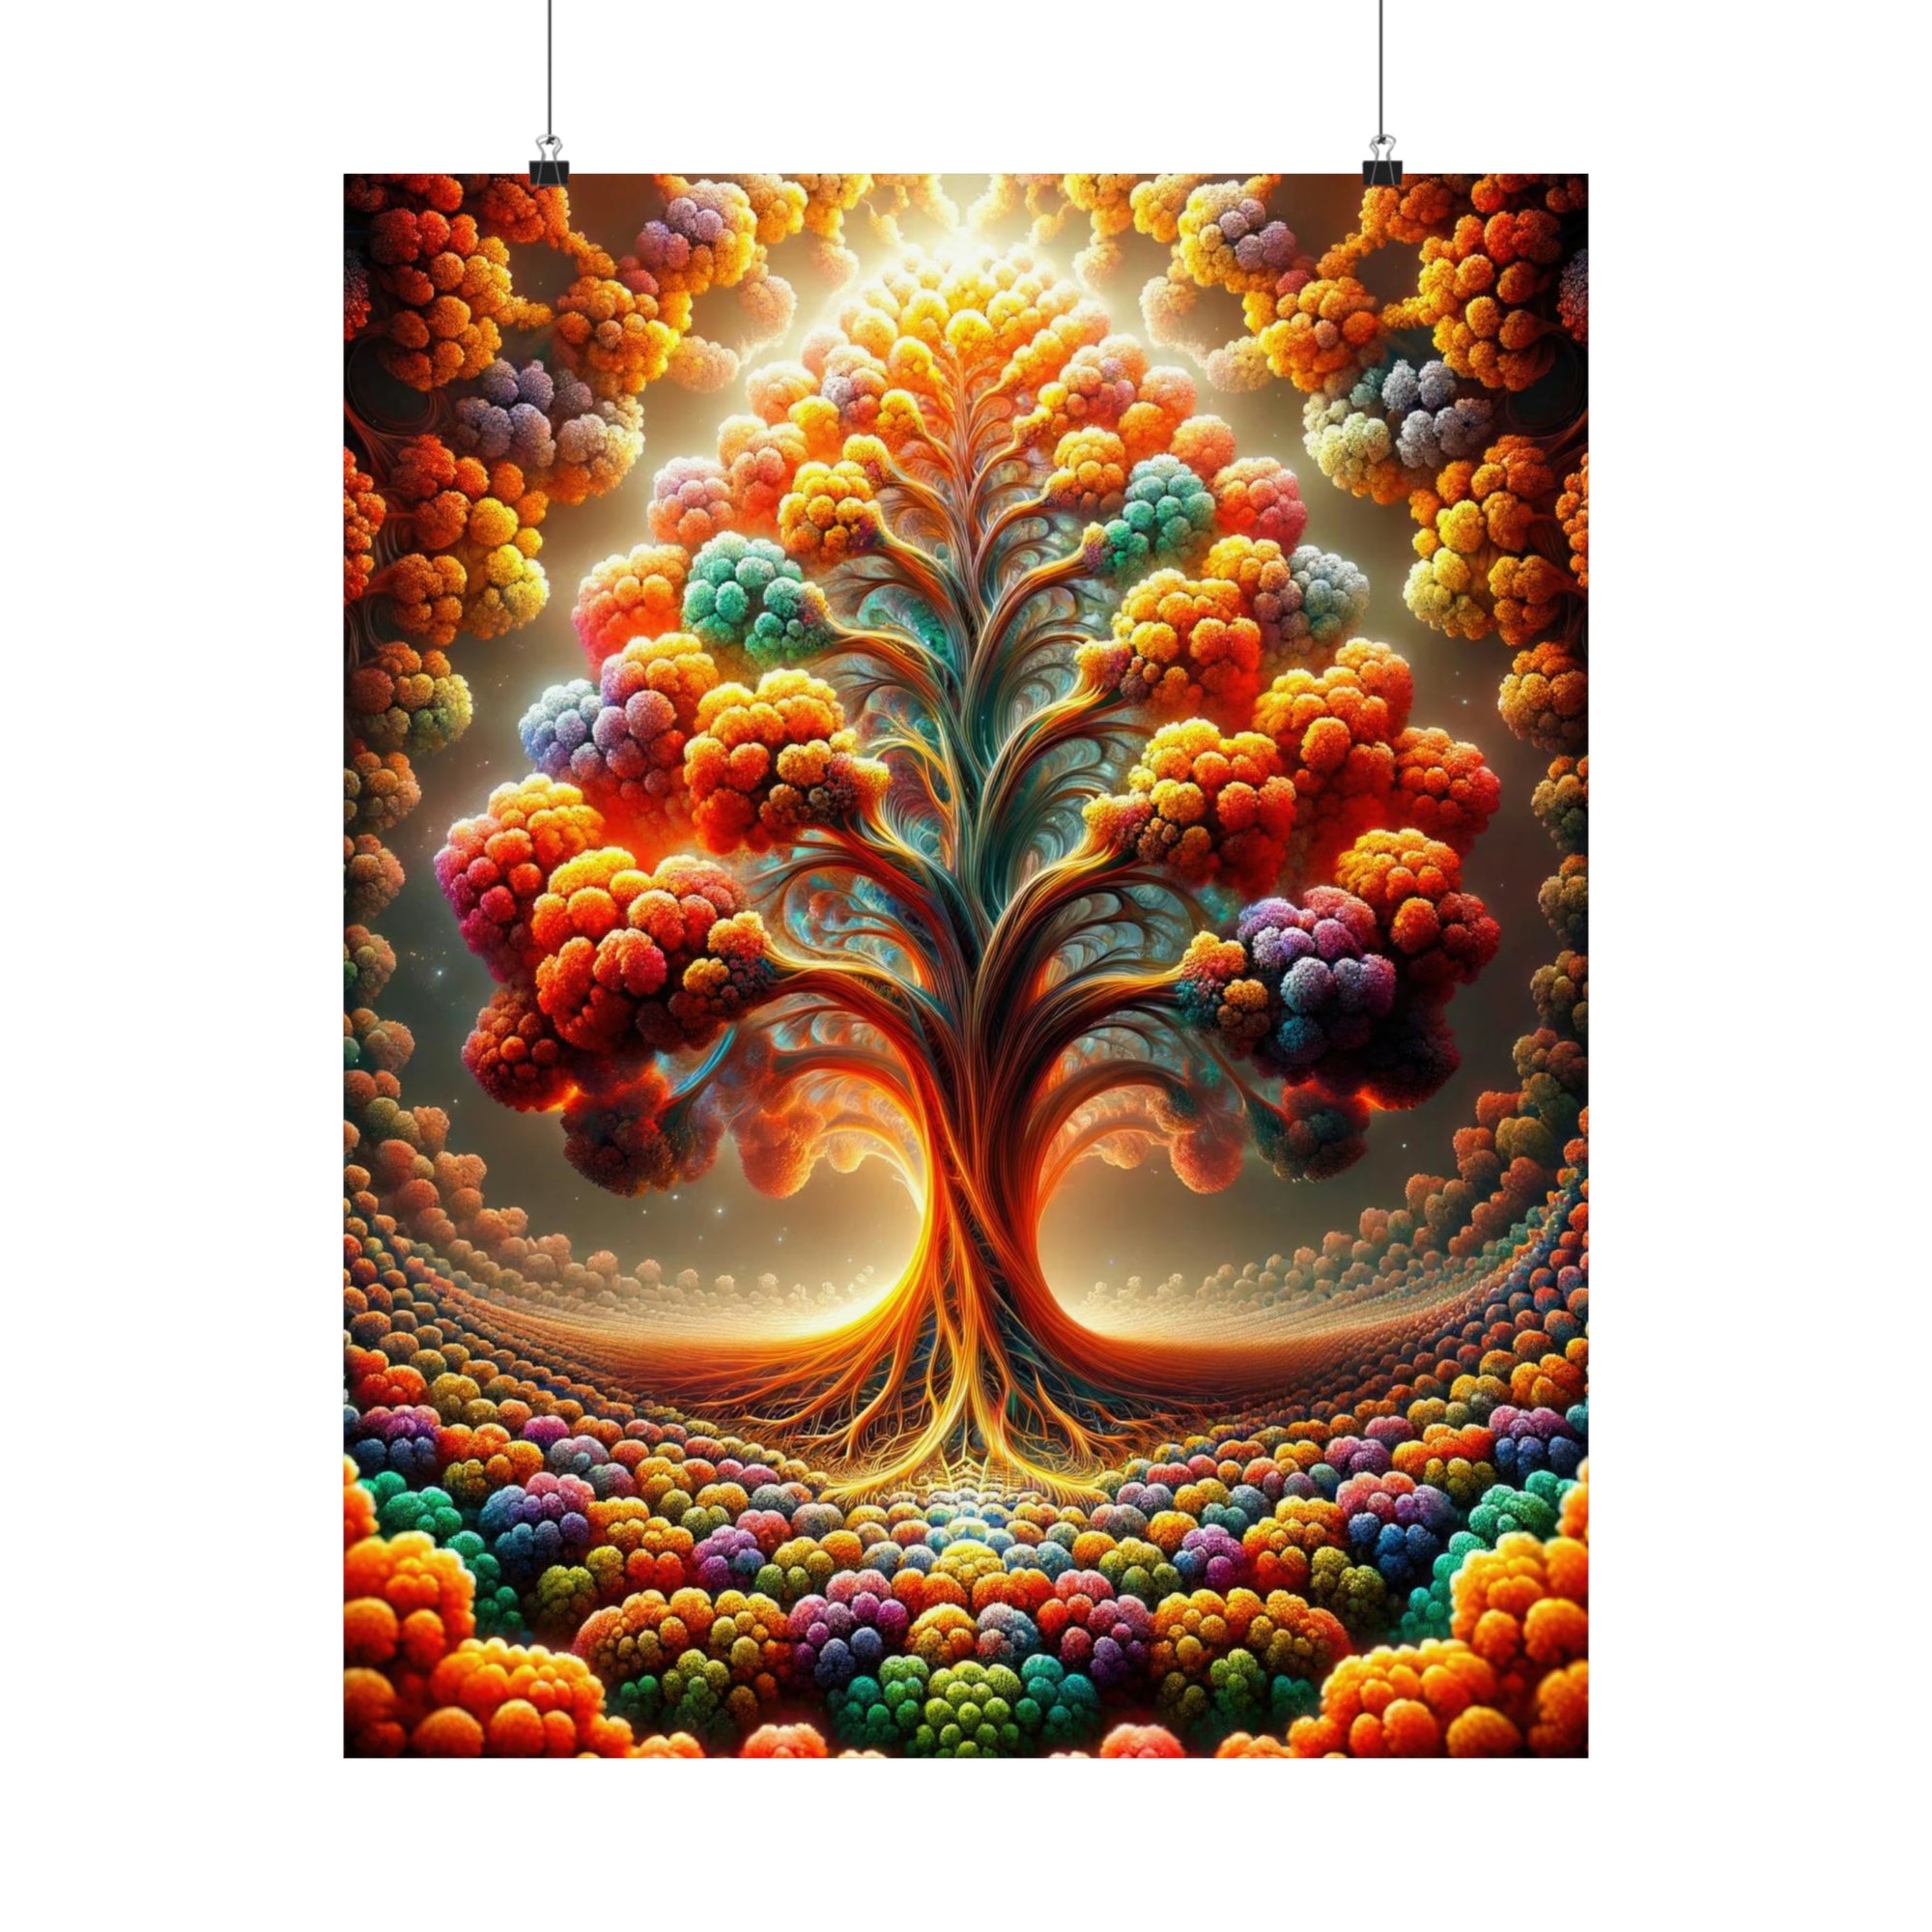 Harmony in the Heart of the Cosmic Orchard Poster